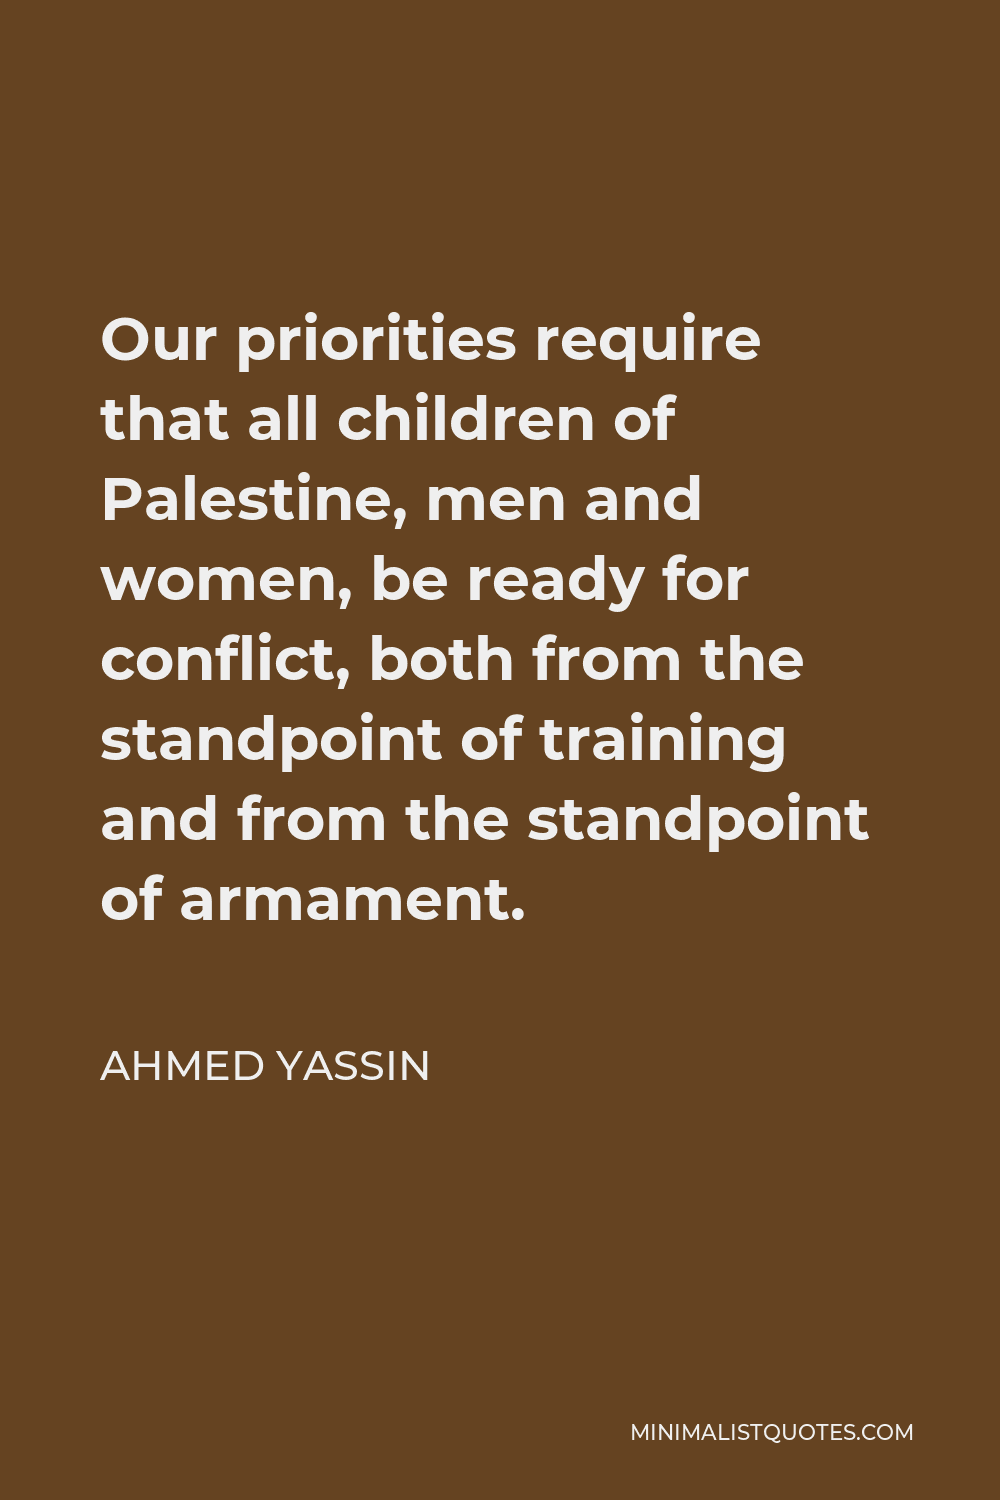 Ahmed Yassin Quote - Our priorities require that all children of Palestine, men and women, be ready for conflict, both from the standpoint of training and from the standpoint of armament.